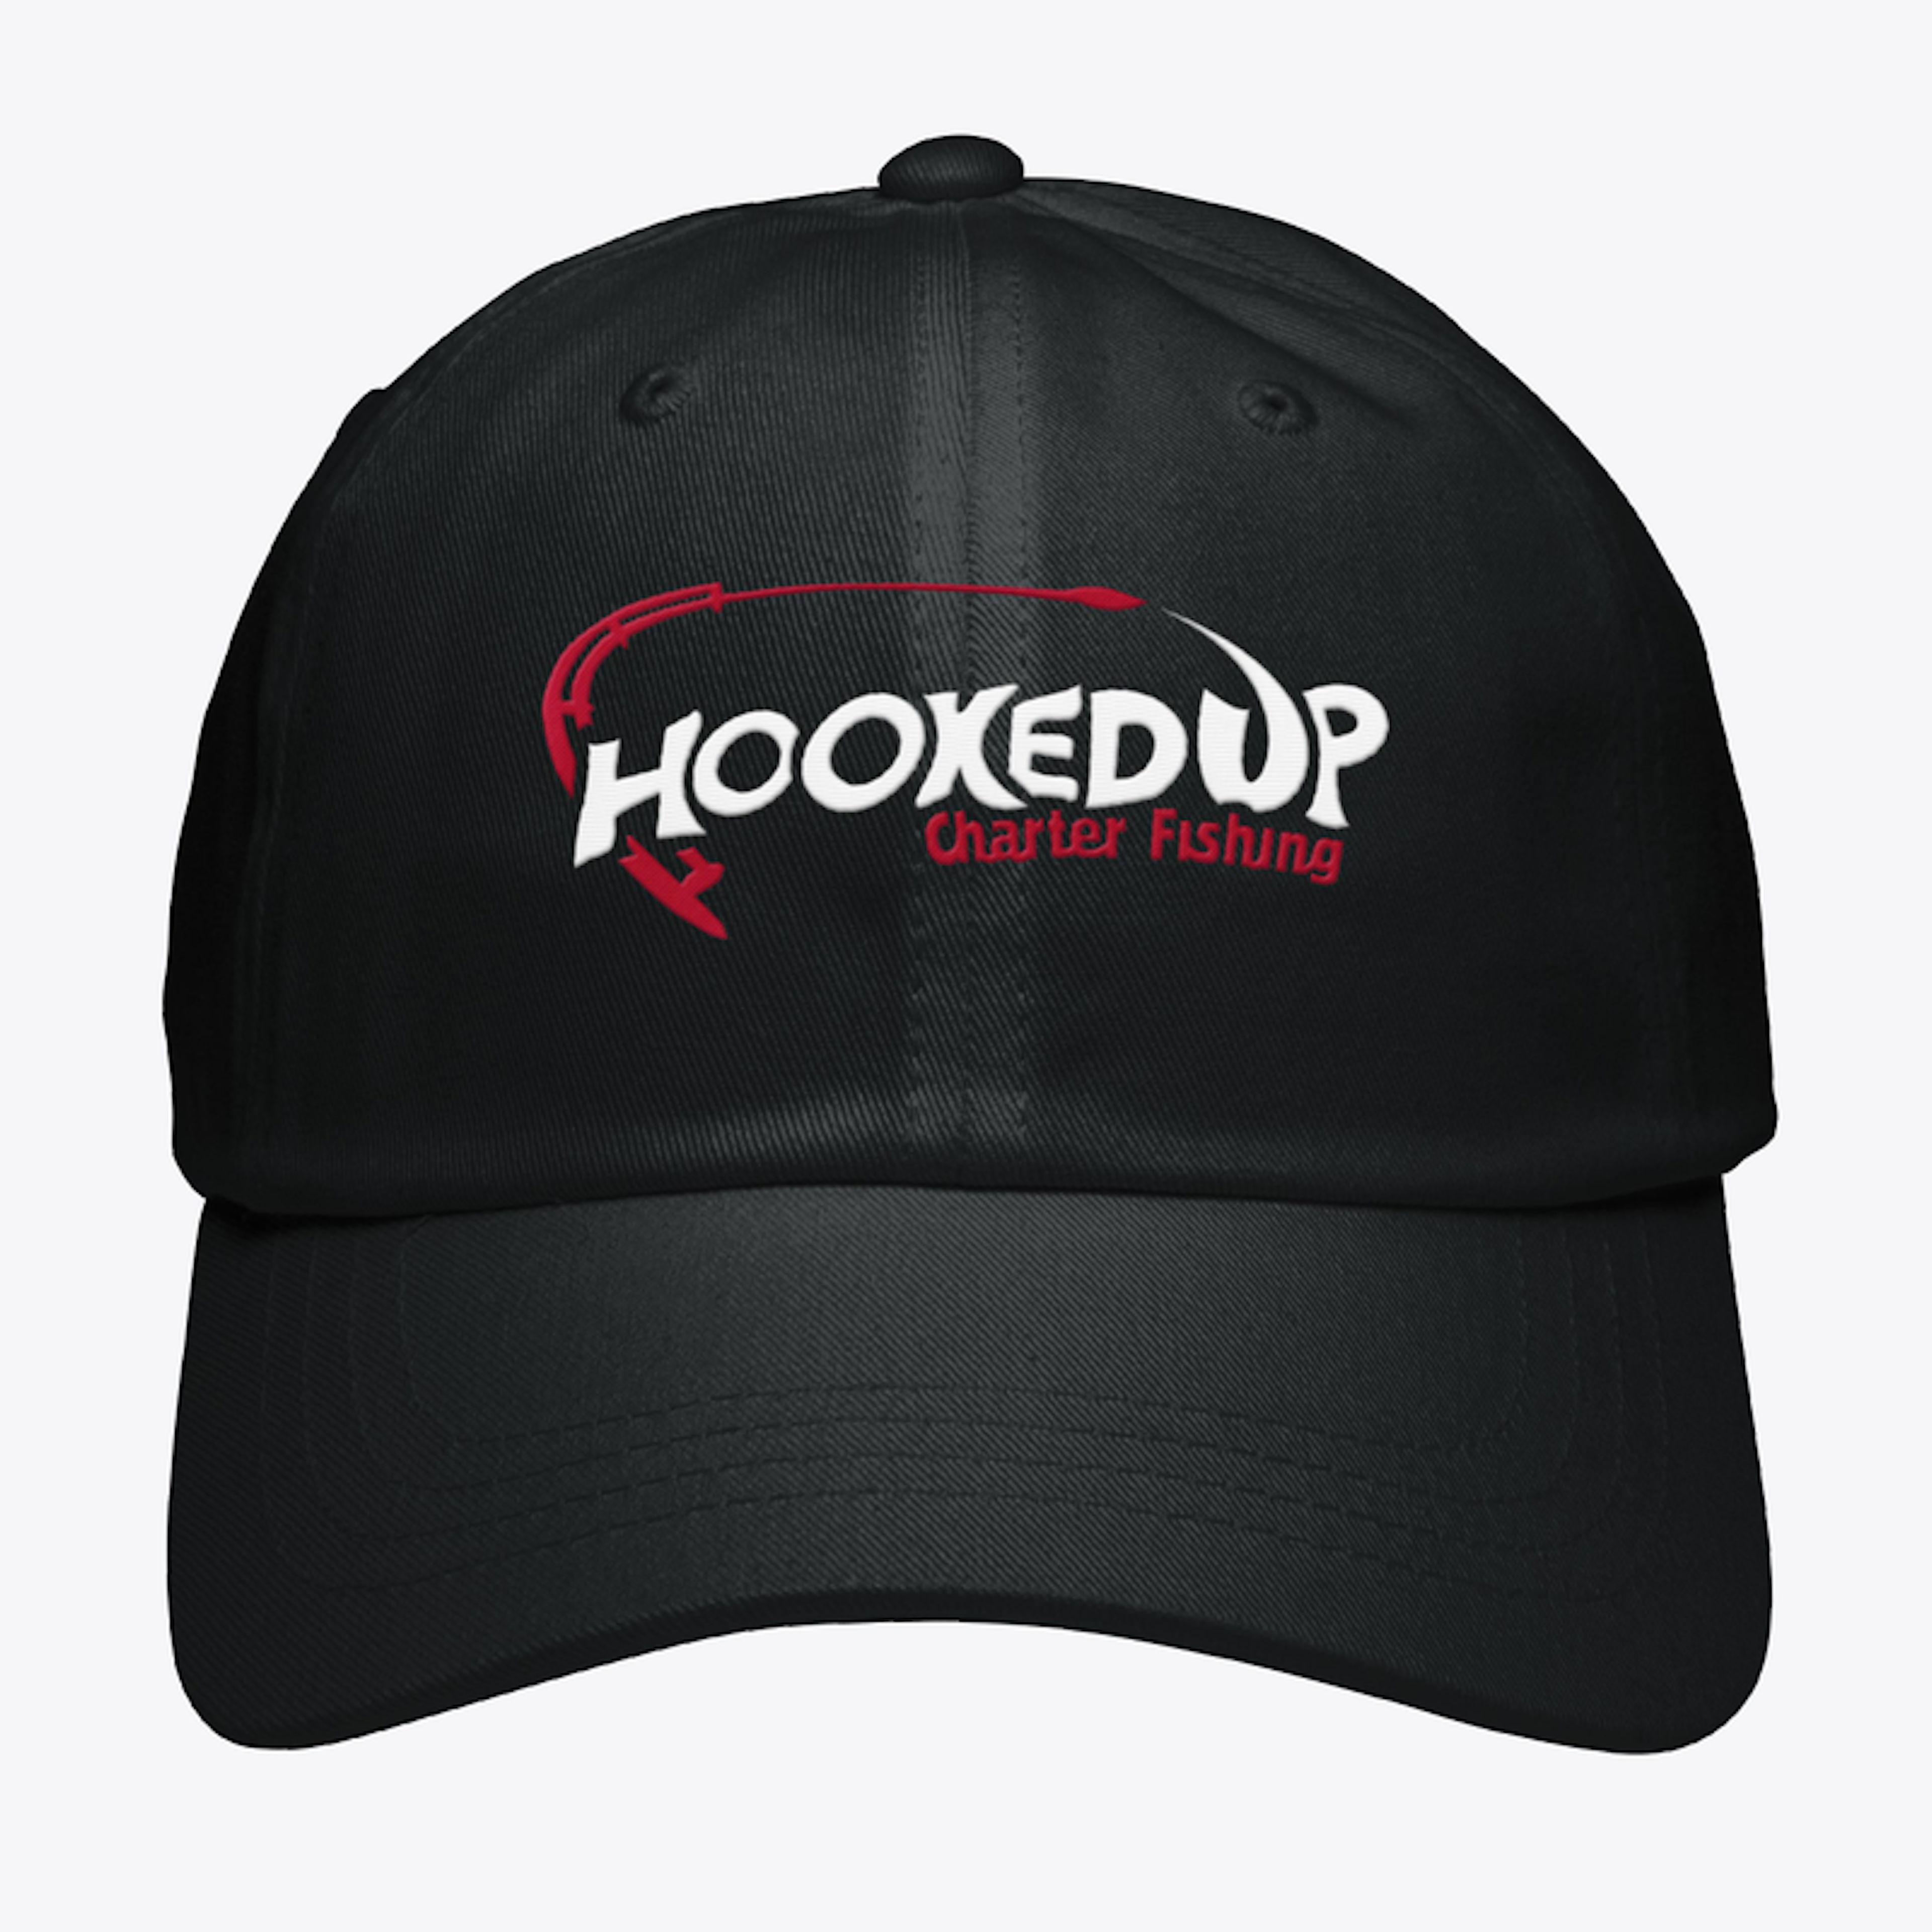 Hooked Up Charter Hat